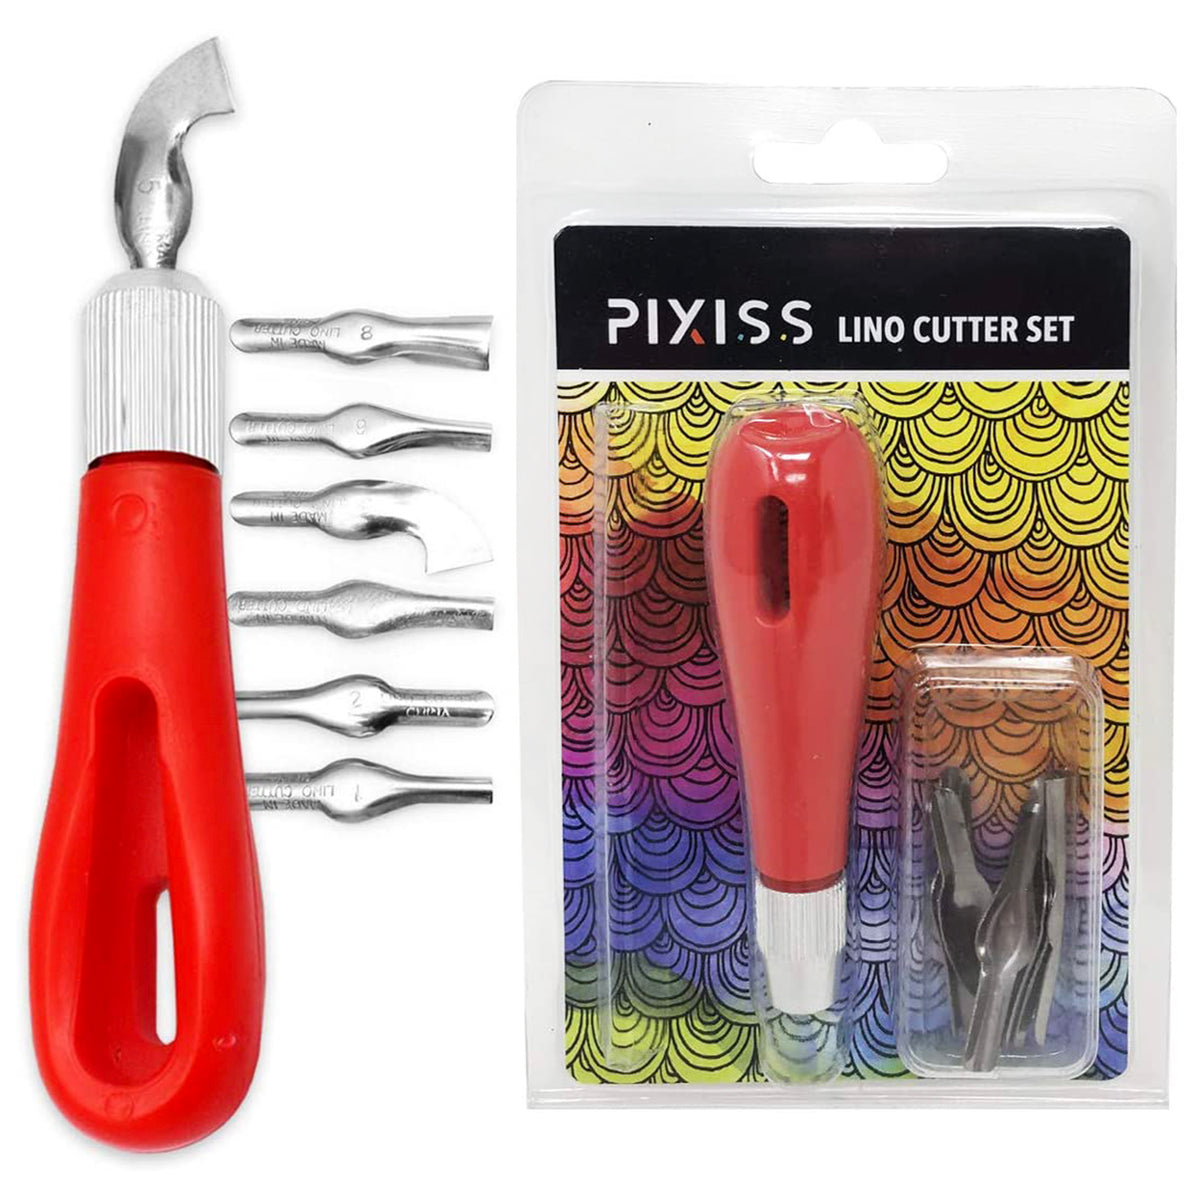 Printmaking Supplies Starter Kit by Pixiss - 3x Stamp pad, 15x Ink Pads for  Rubber Stamps, Hobby Knife Pen with 6 Blades, Stamp Carving Tool 